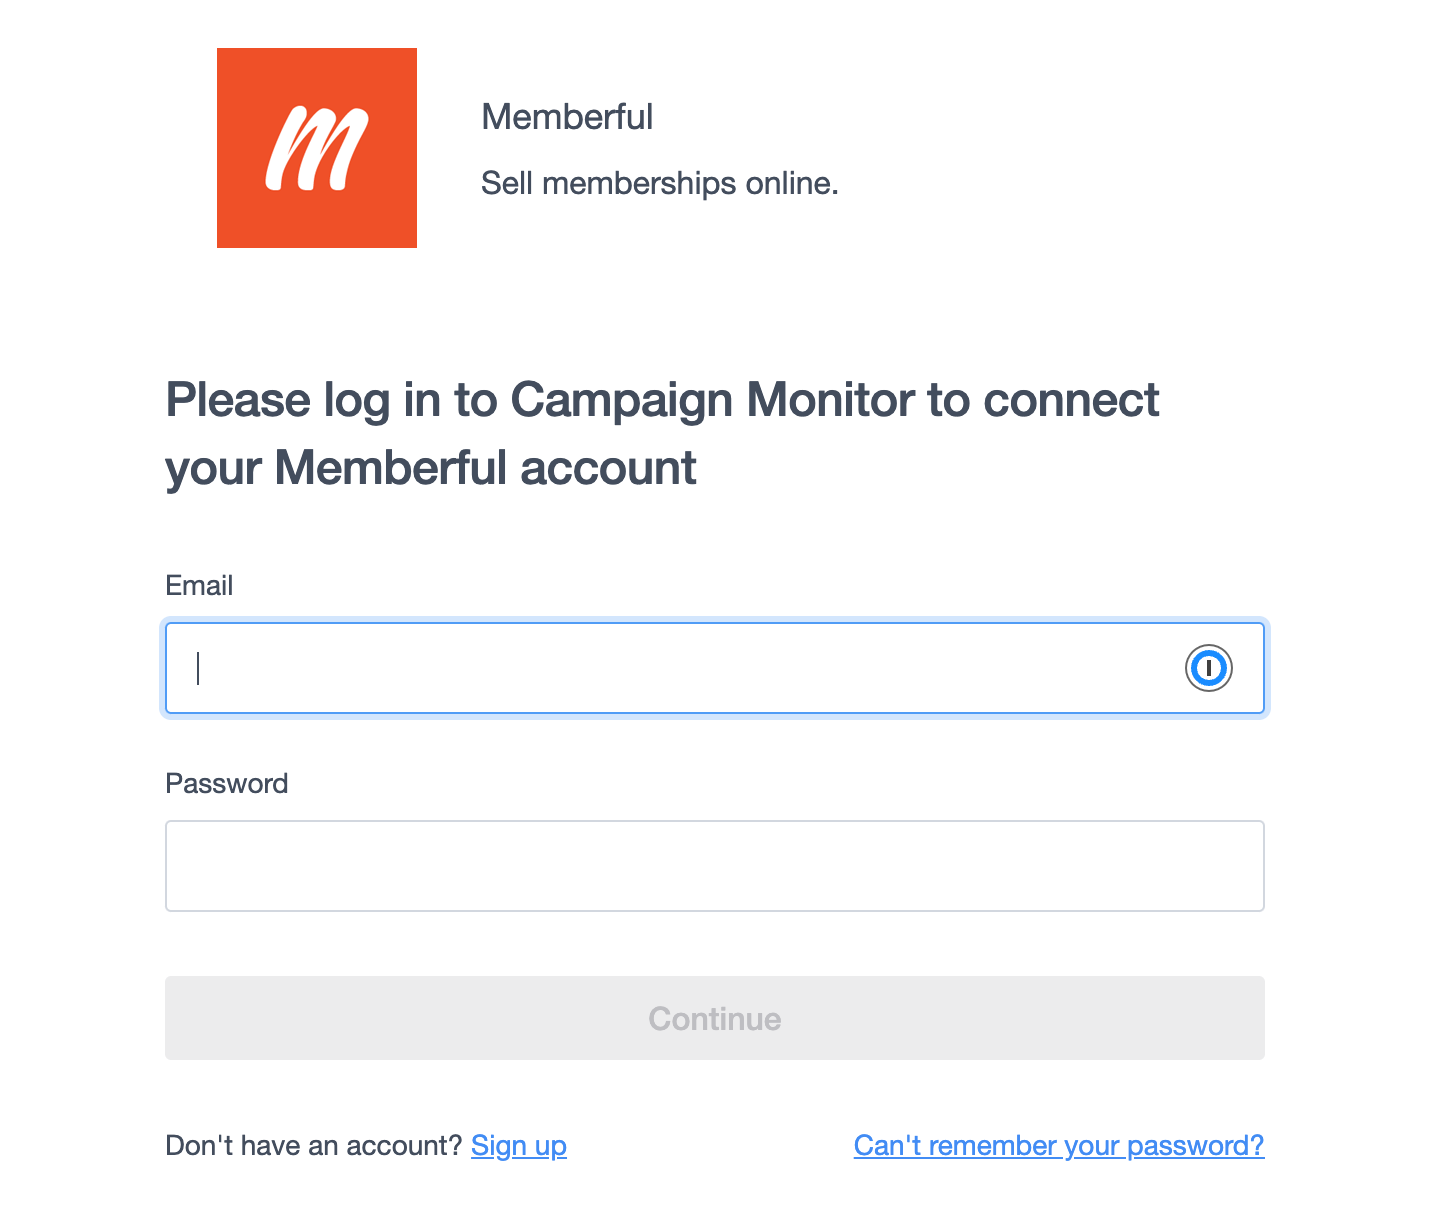 Connect to Campaign Monitor